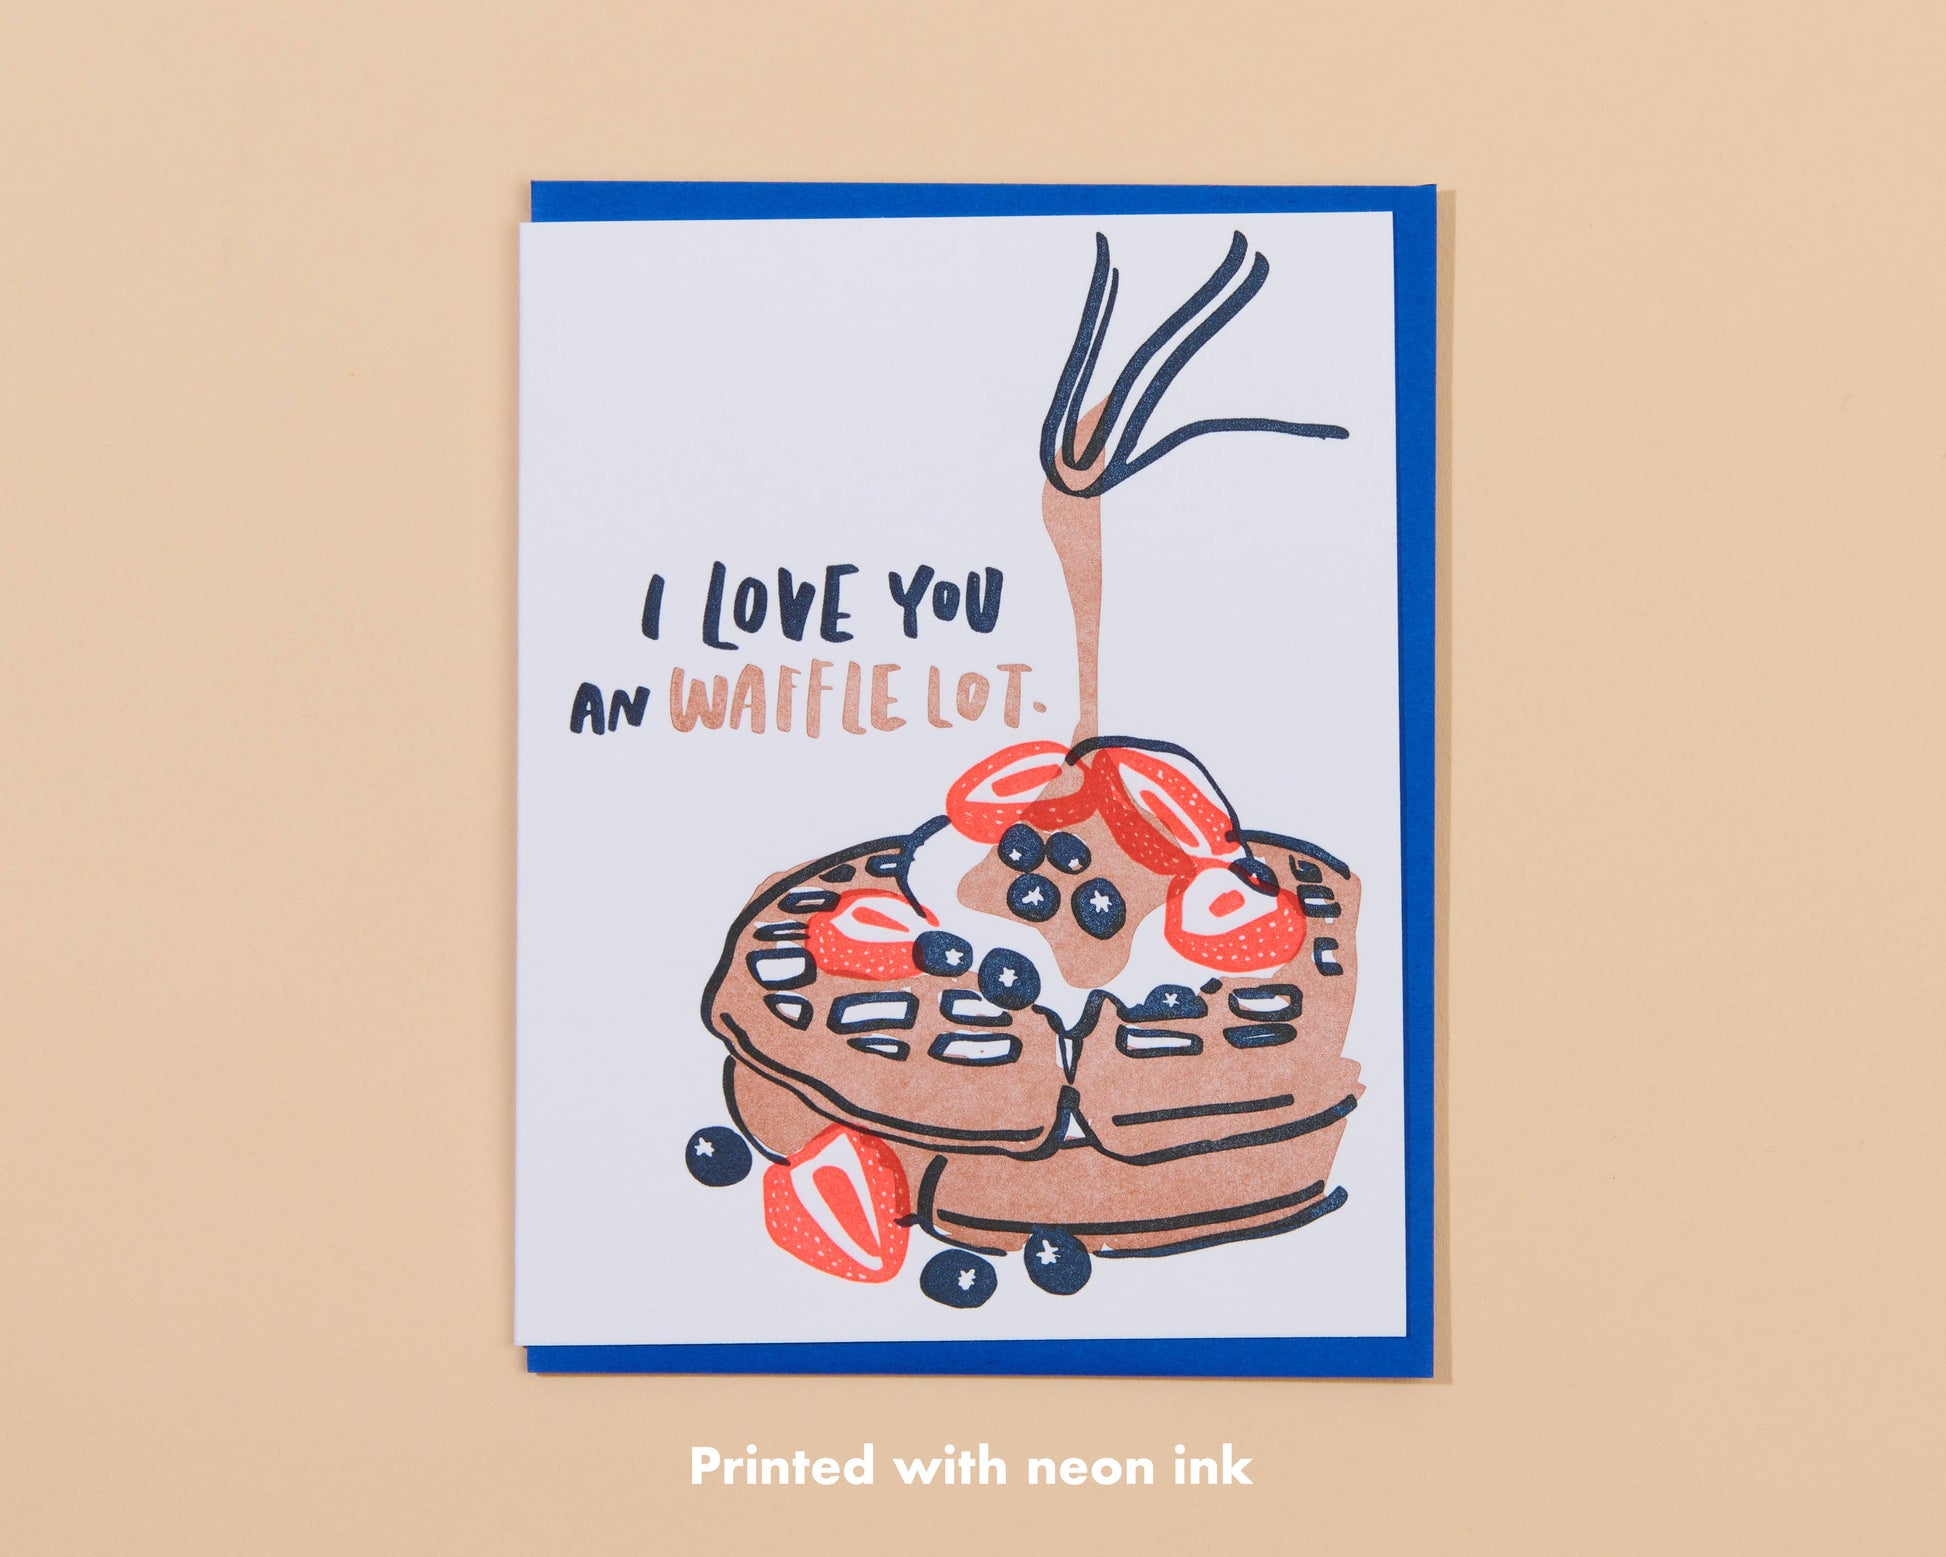 Greeting card that reads "I love you an waffle lot" and has an image of a waffle with berries, cream and syrup